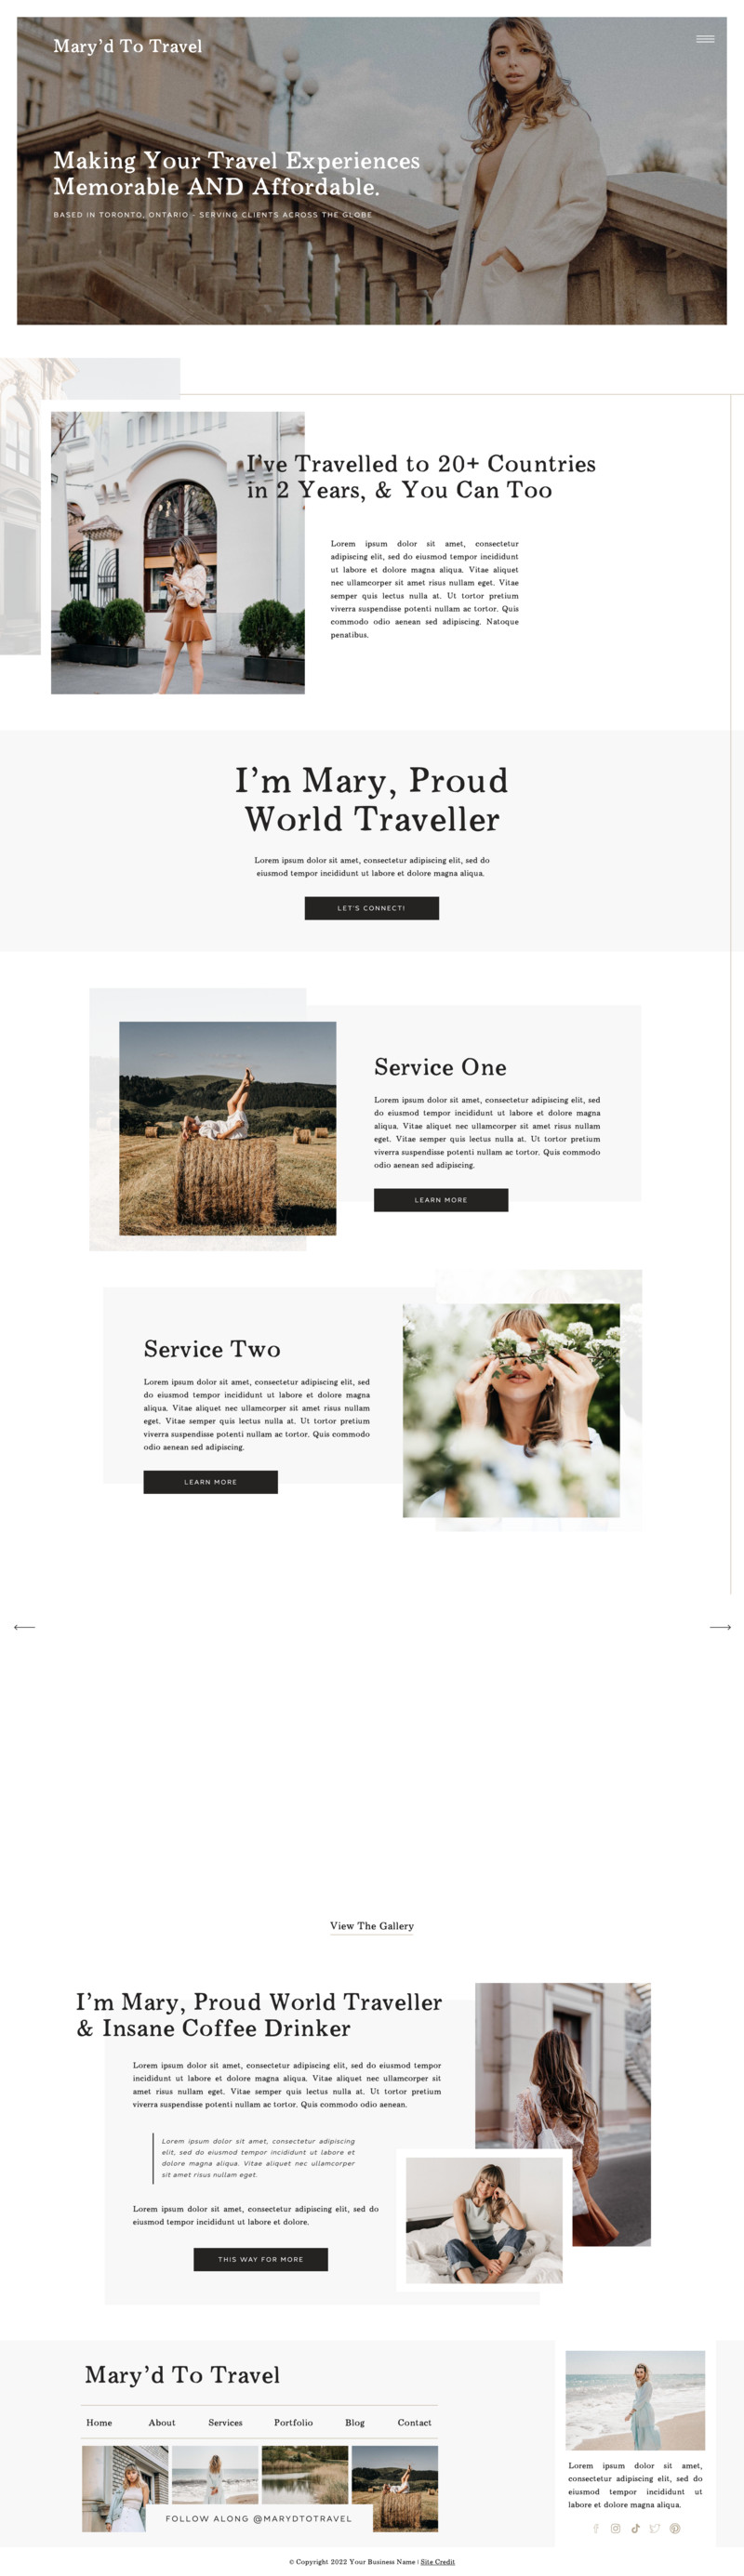 Showit Website Template for Travel Agents